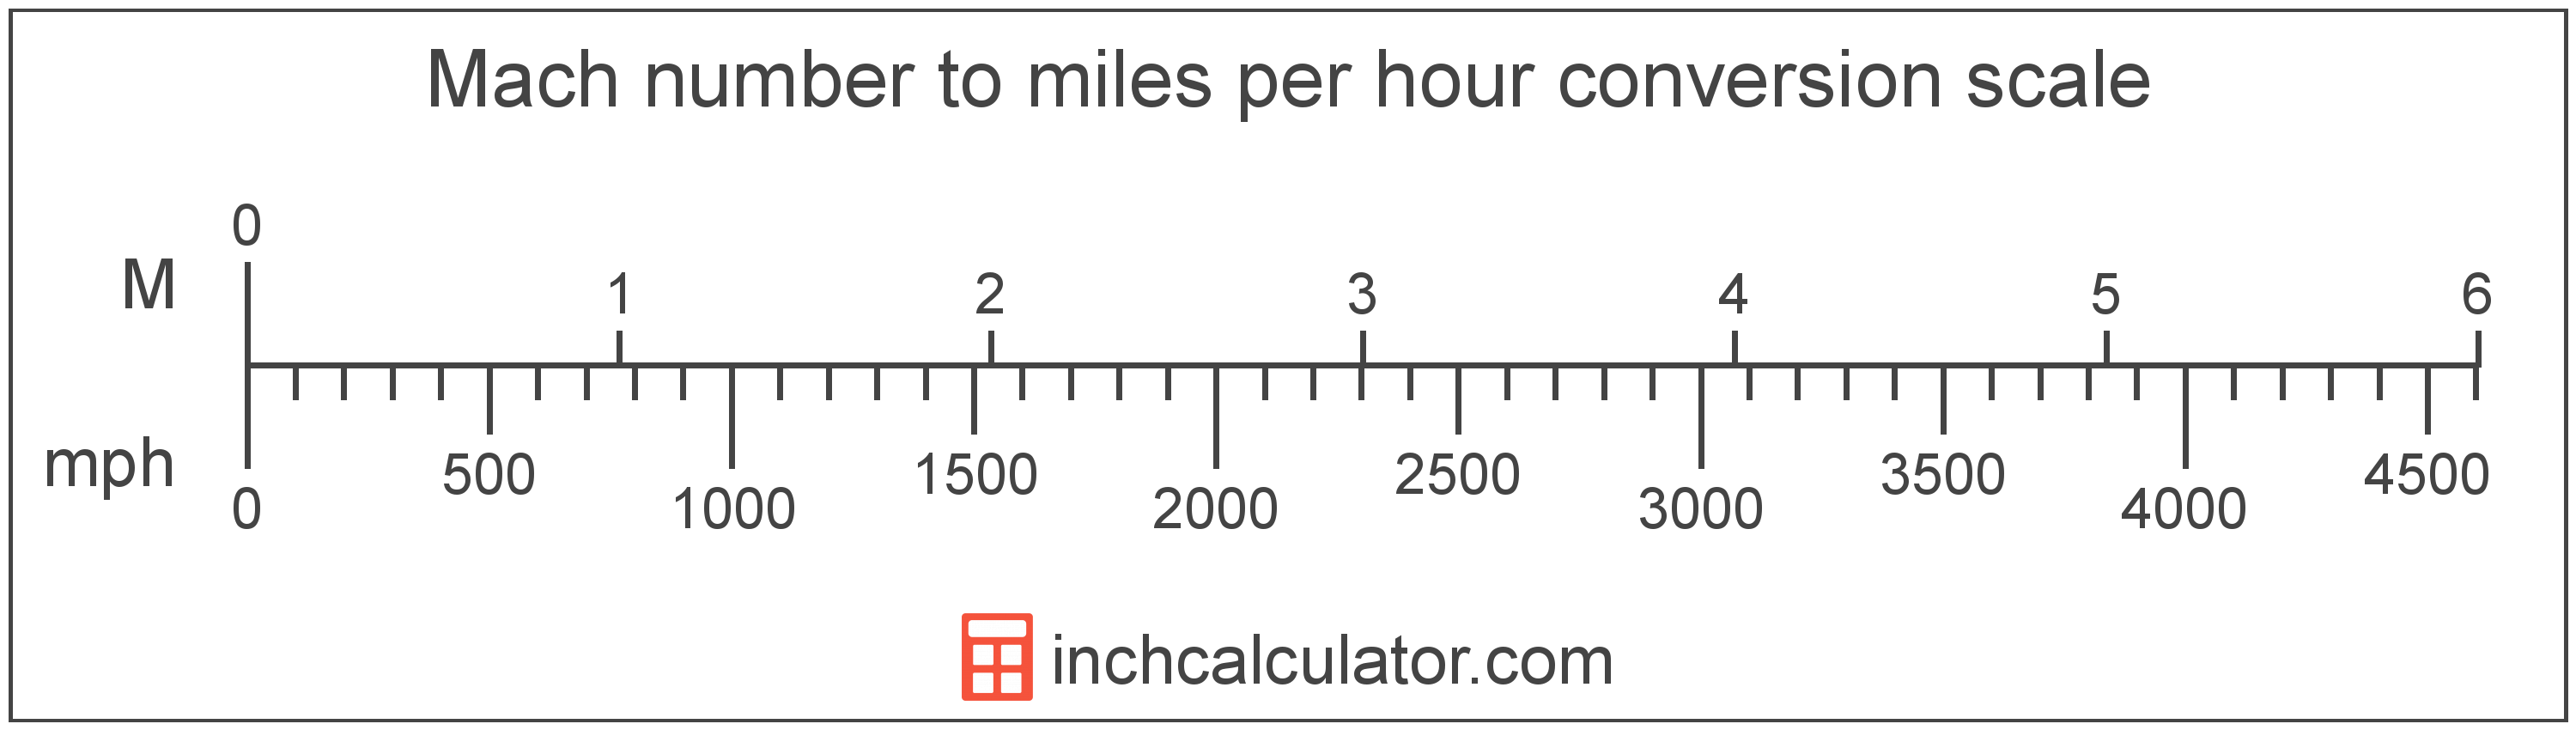 conversion scale showing Mach number and equivalent miles per hour speed values